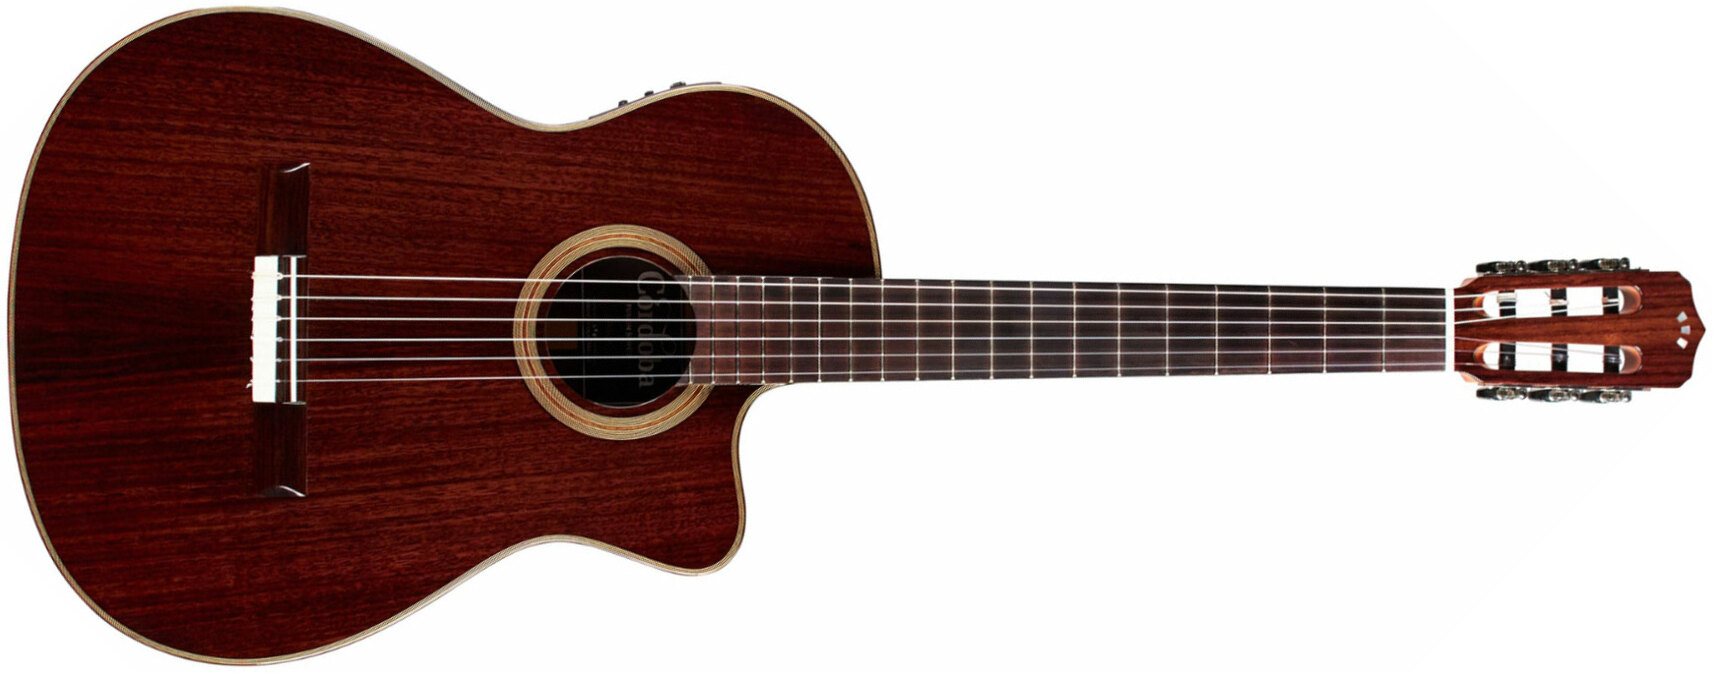 Cordoba Fusion 12 Rose Ii 4/4 Cw Tout Palissandre Eb - Natural - Classical guitar 4/4 size - Main picture